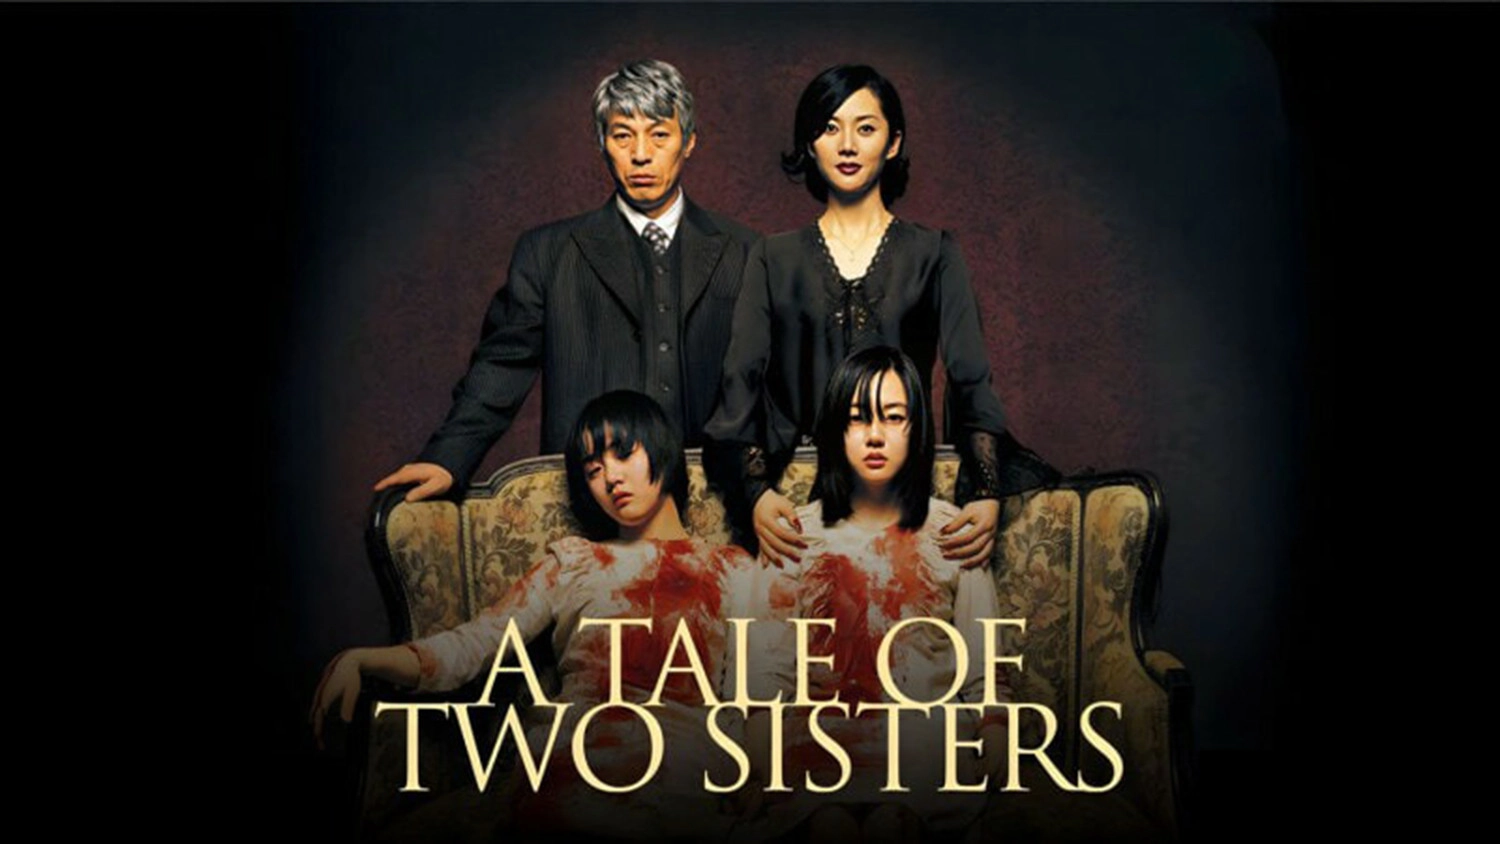 phim-kinh-di-han-quoc-a-tale-of-two-sisters